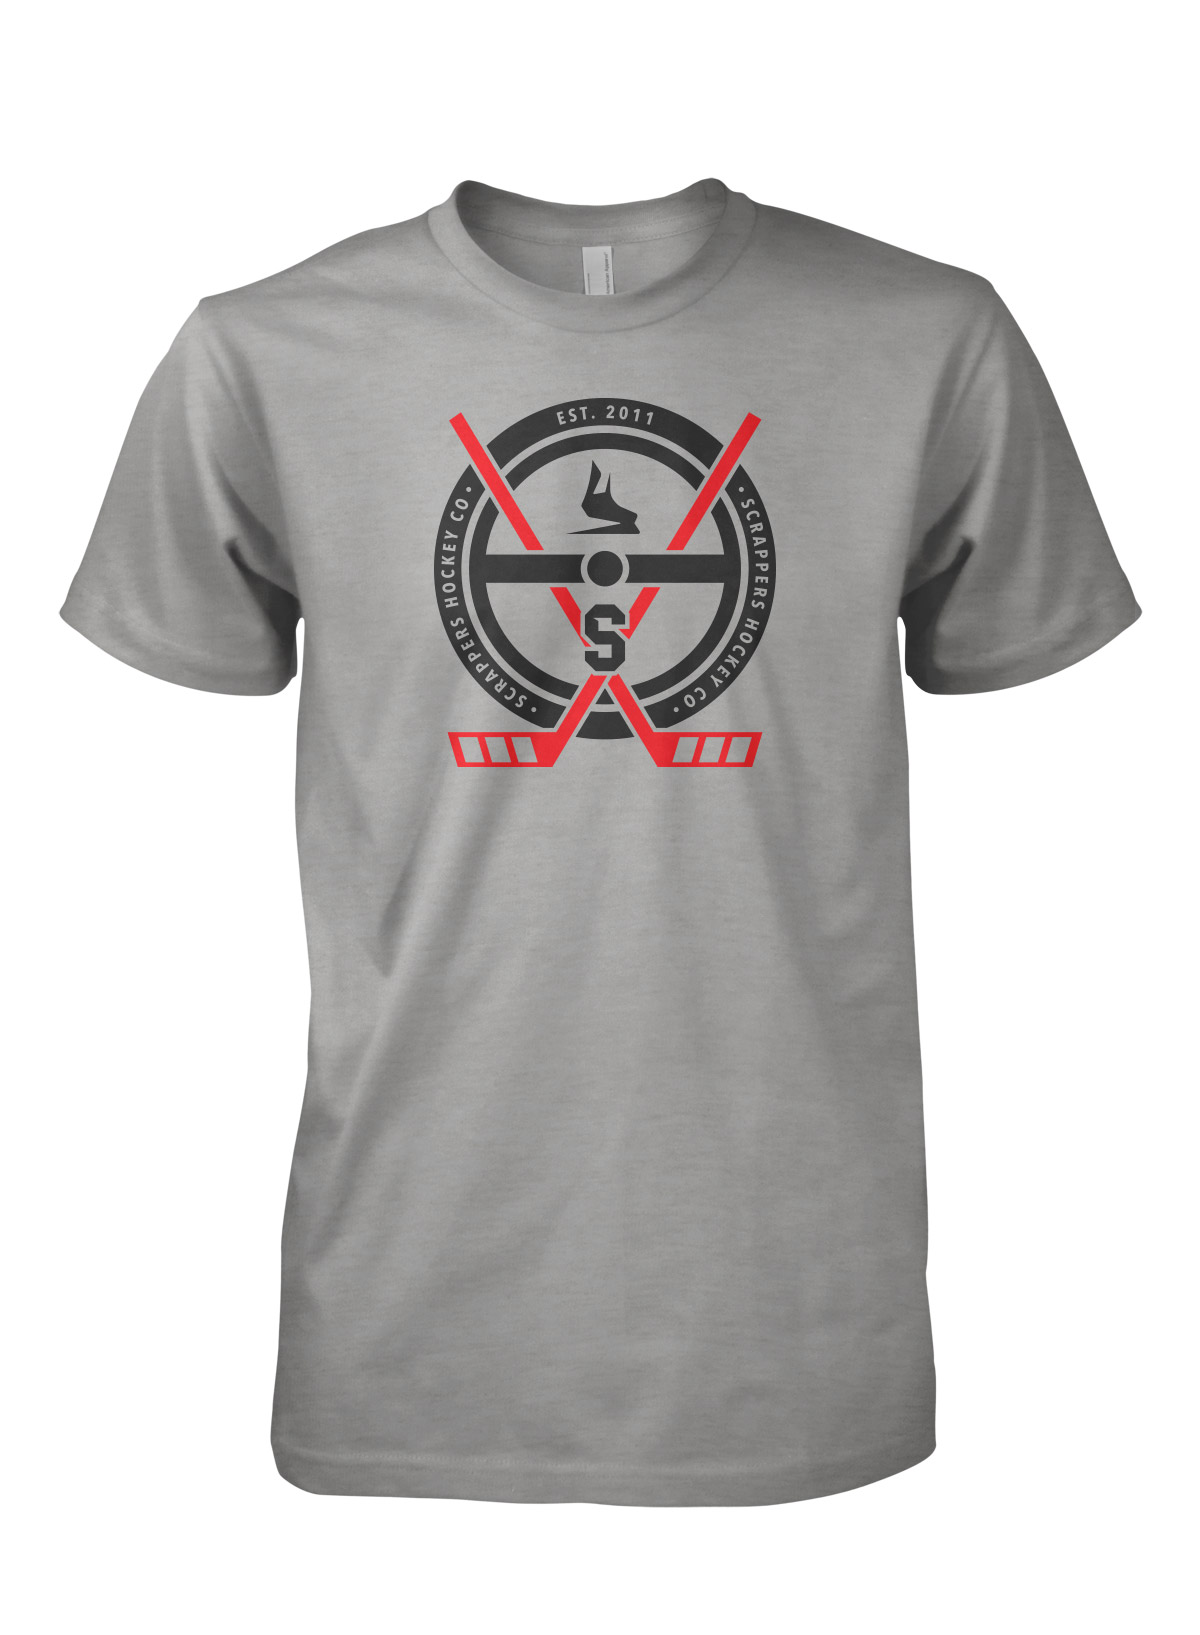 Hockey T Shirt Crest by Scrappers Hockey